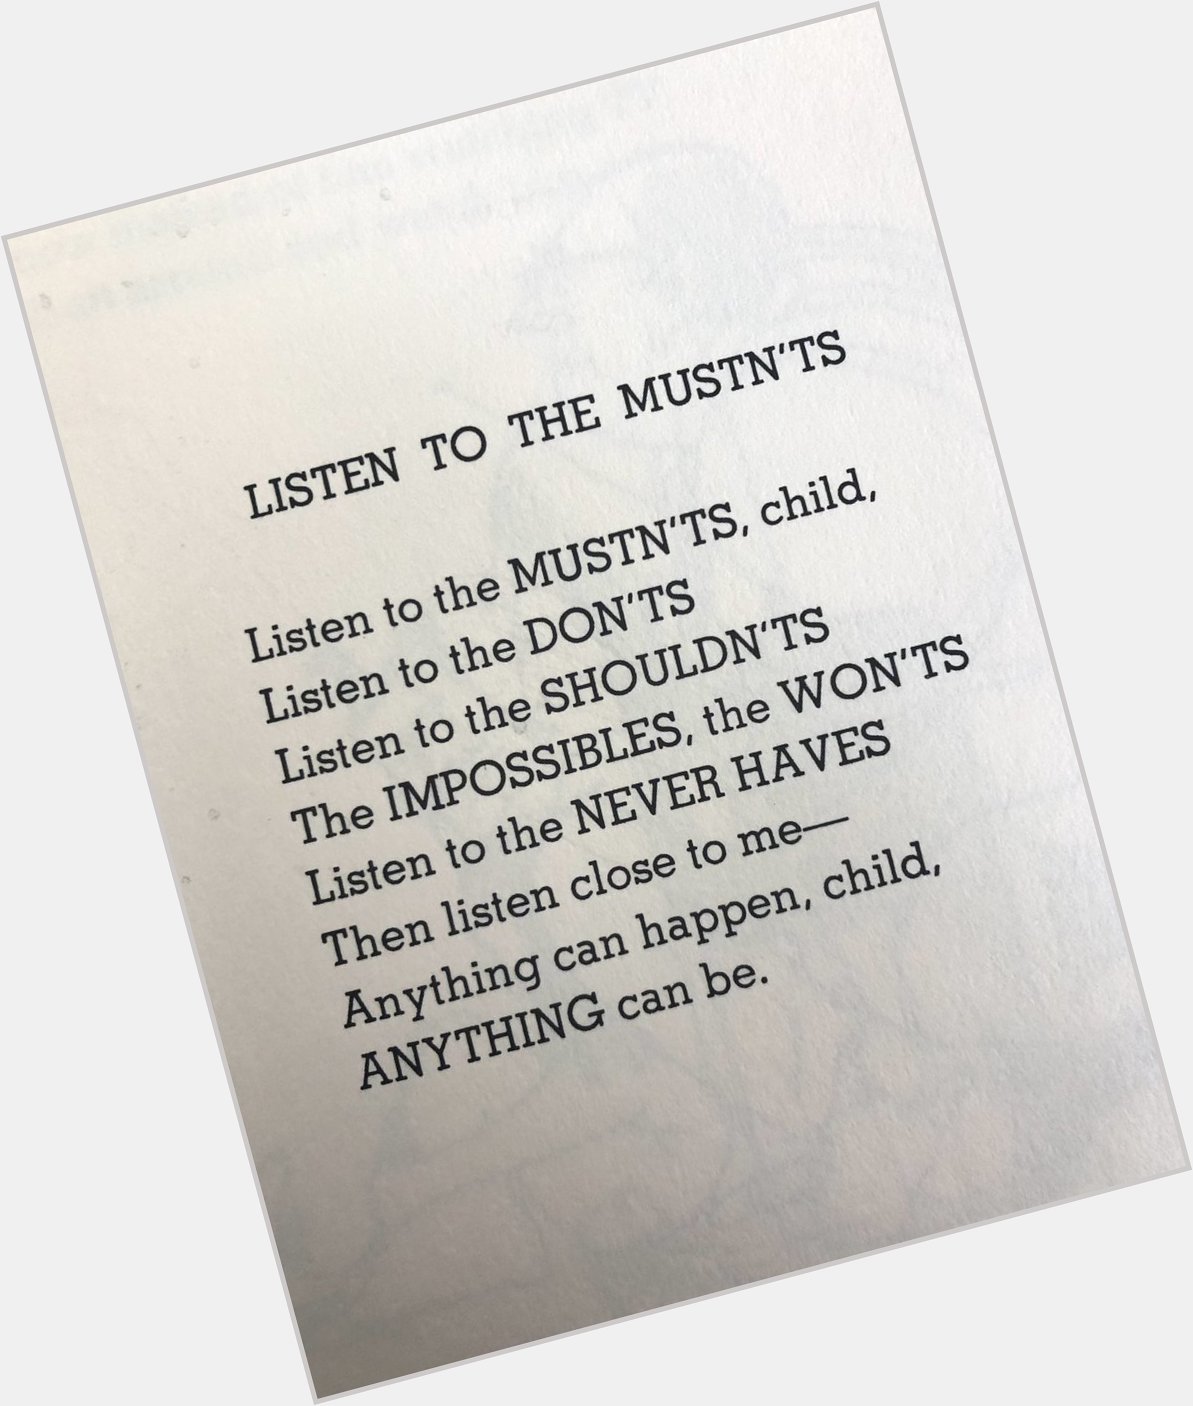 Happy 91st birthday to the late, great Shel Silverstein! More relevant now than ever. 